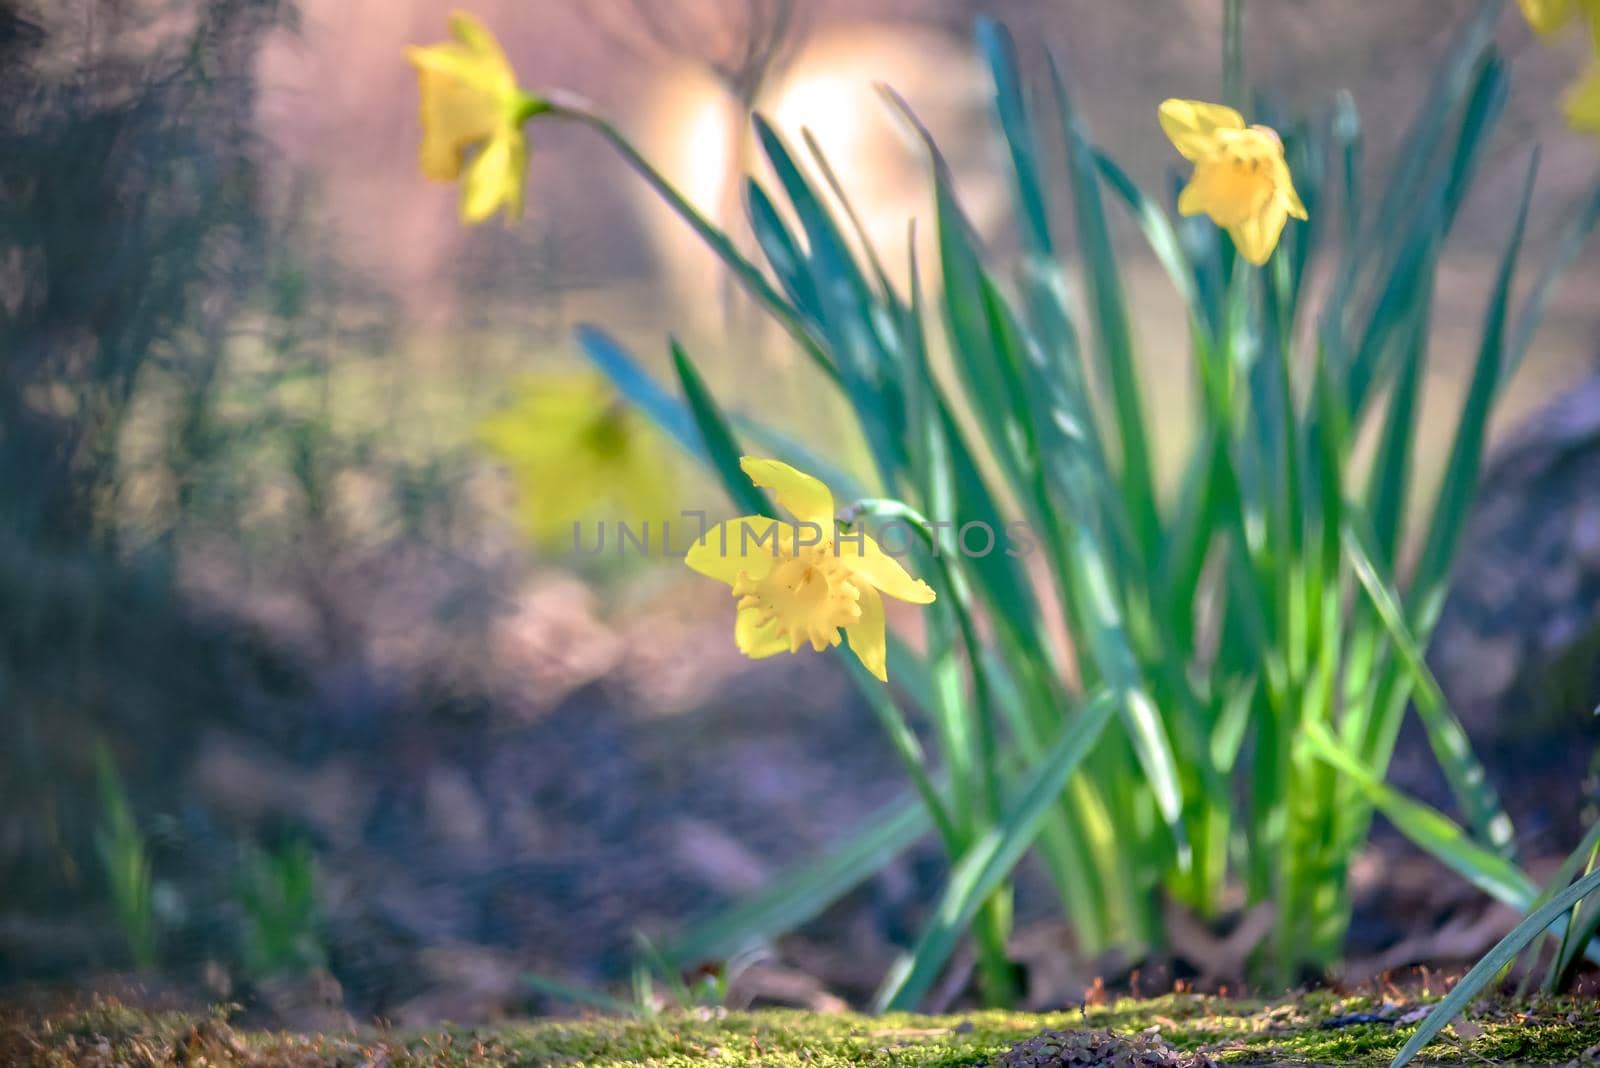 Narcissus blooming in nature near a tree  by digidreamgrafix